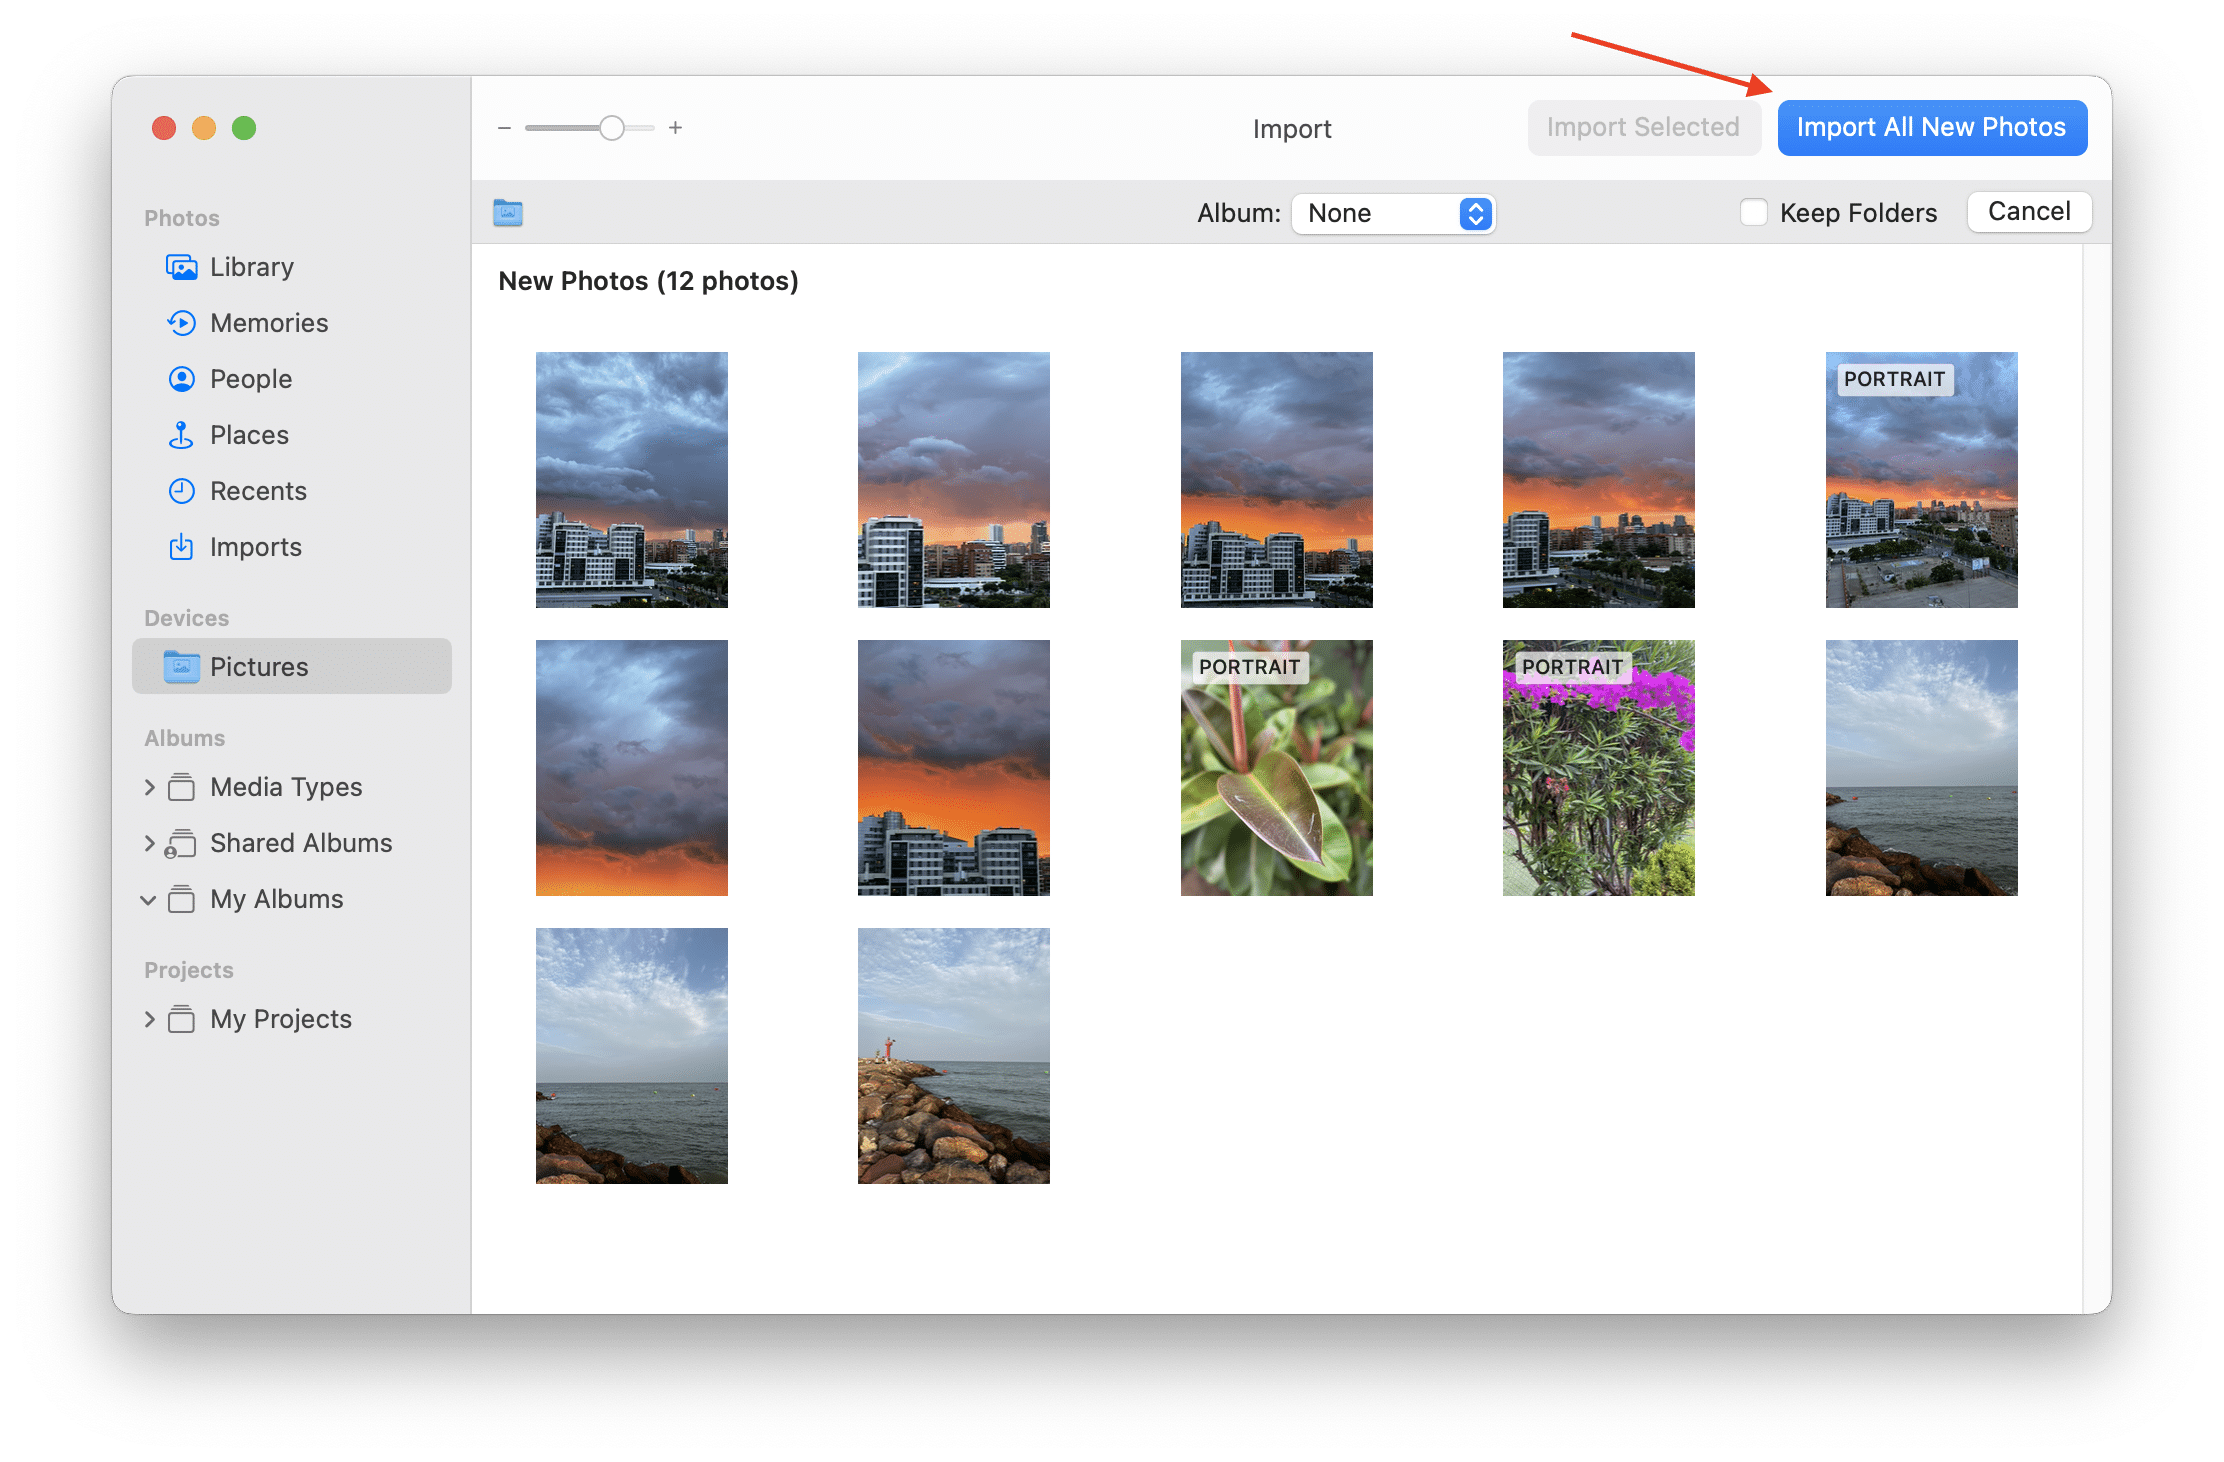 Importing photos in the Photos Library